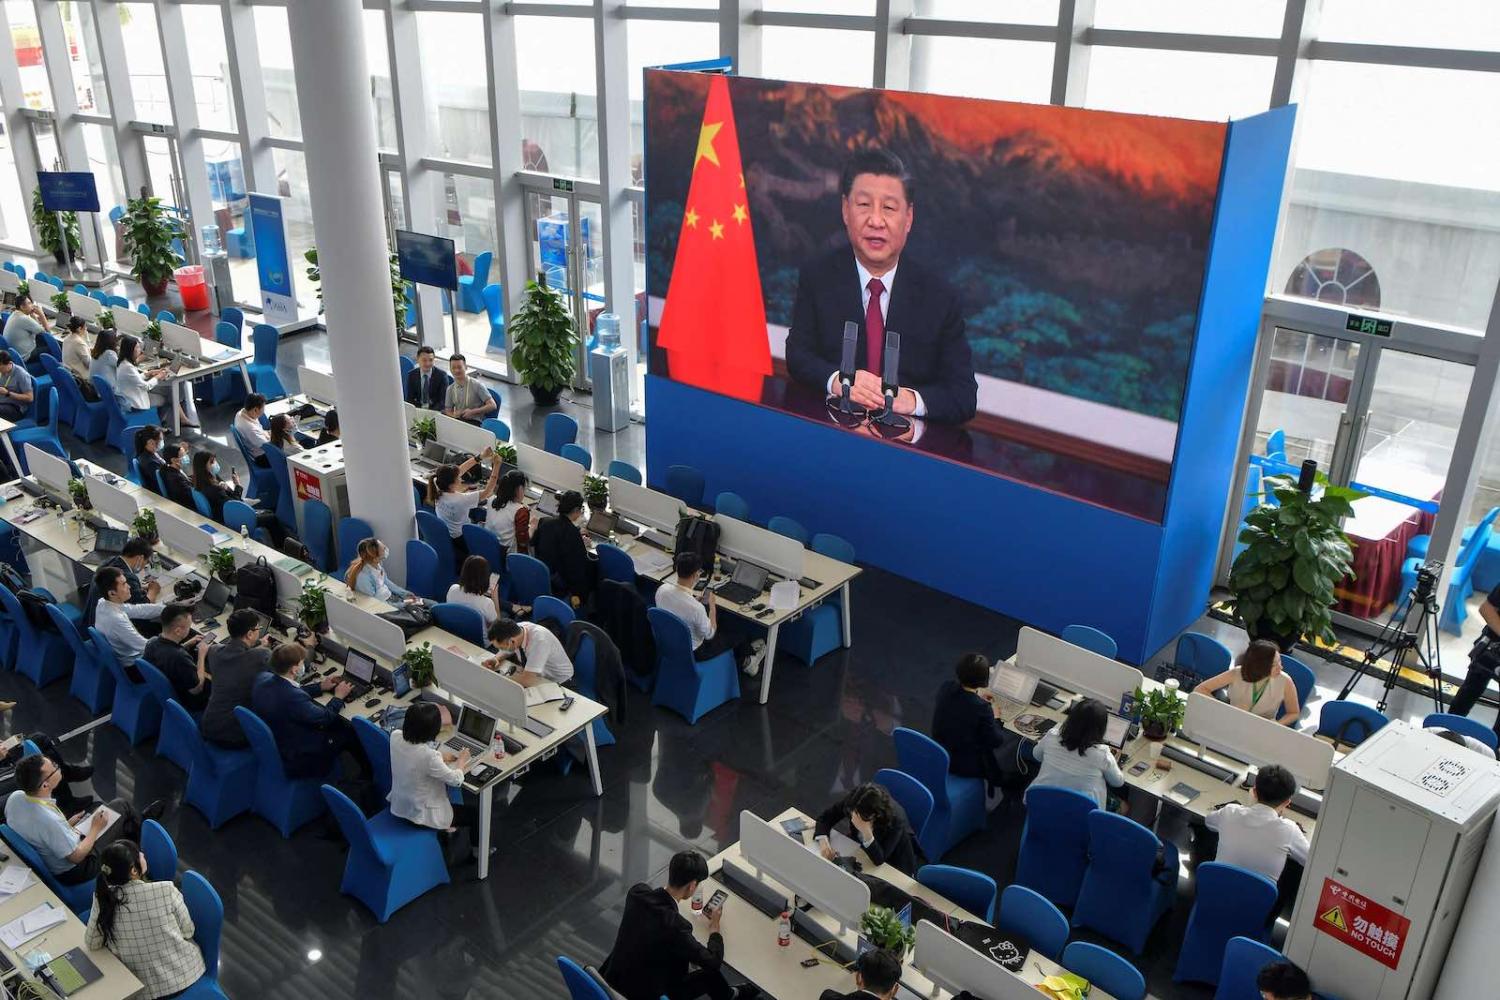 Journalists watch on screen as China’s President Xi Jinping delivers a speech during the opening of the Boao Forum for Asia on 20 April (STR/AFP via Getty Images)